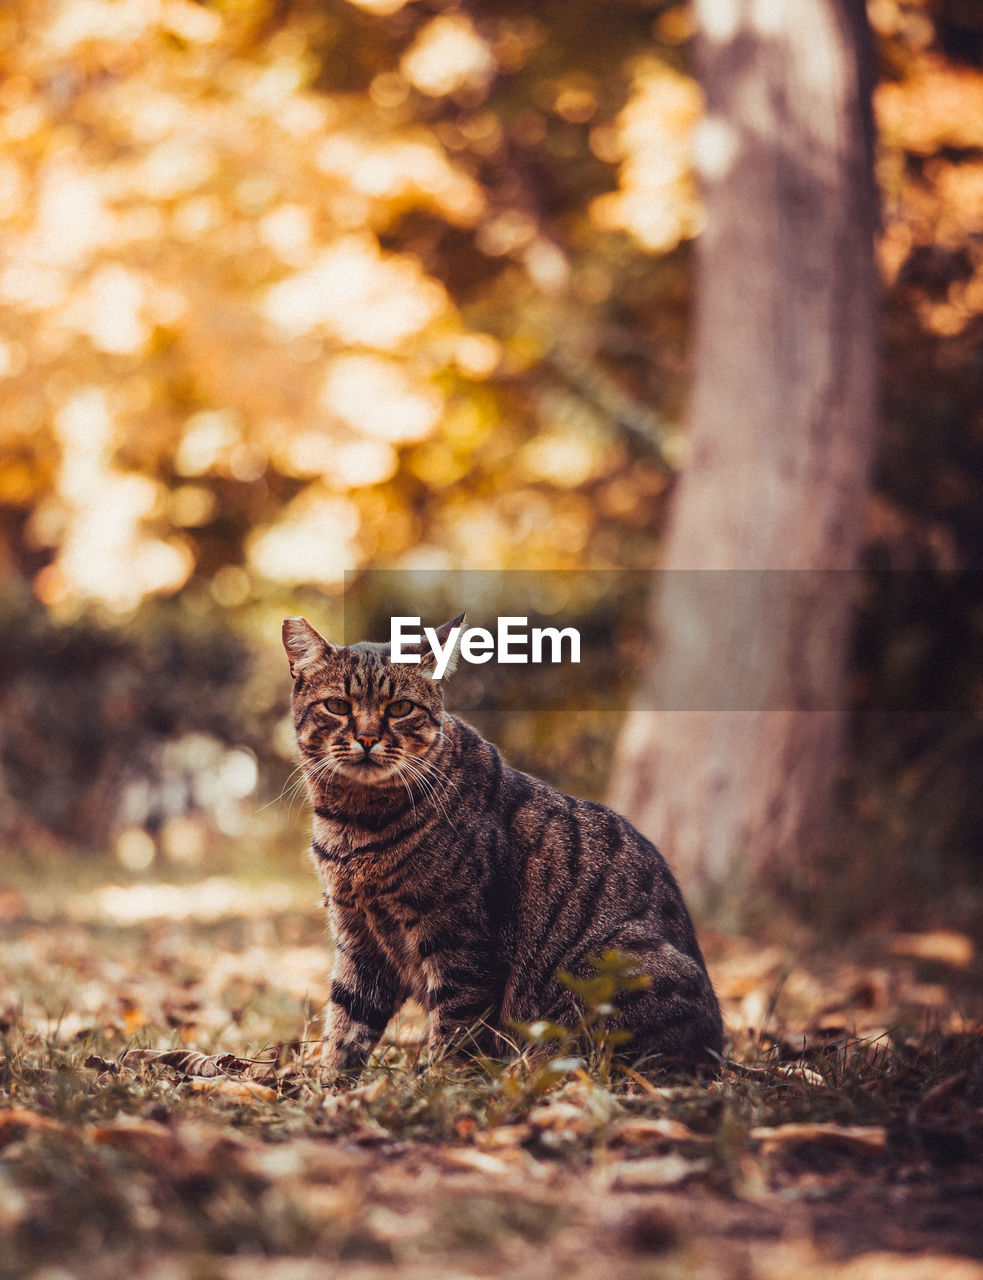 Cat looks at falling leaves during golden autumn